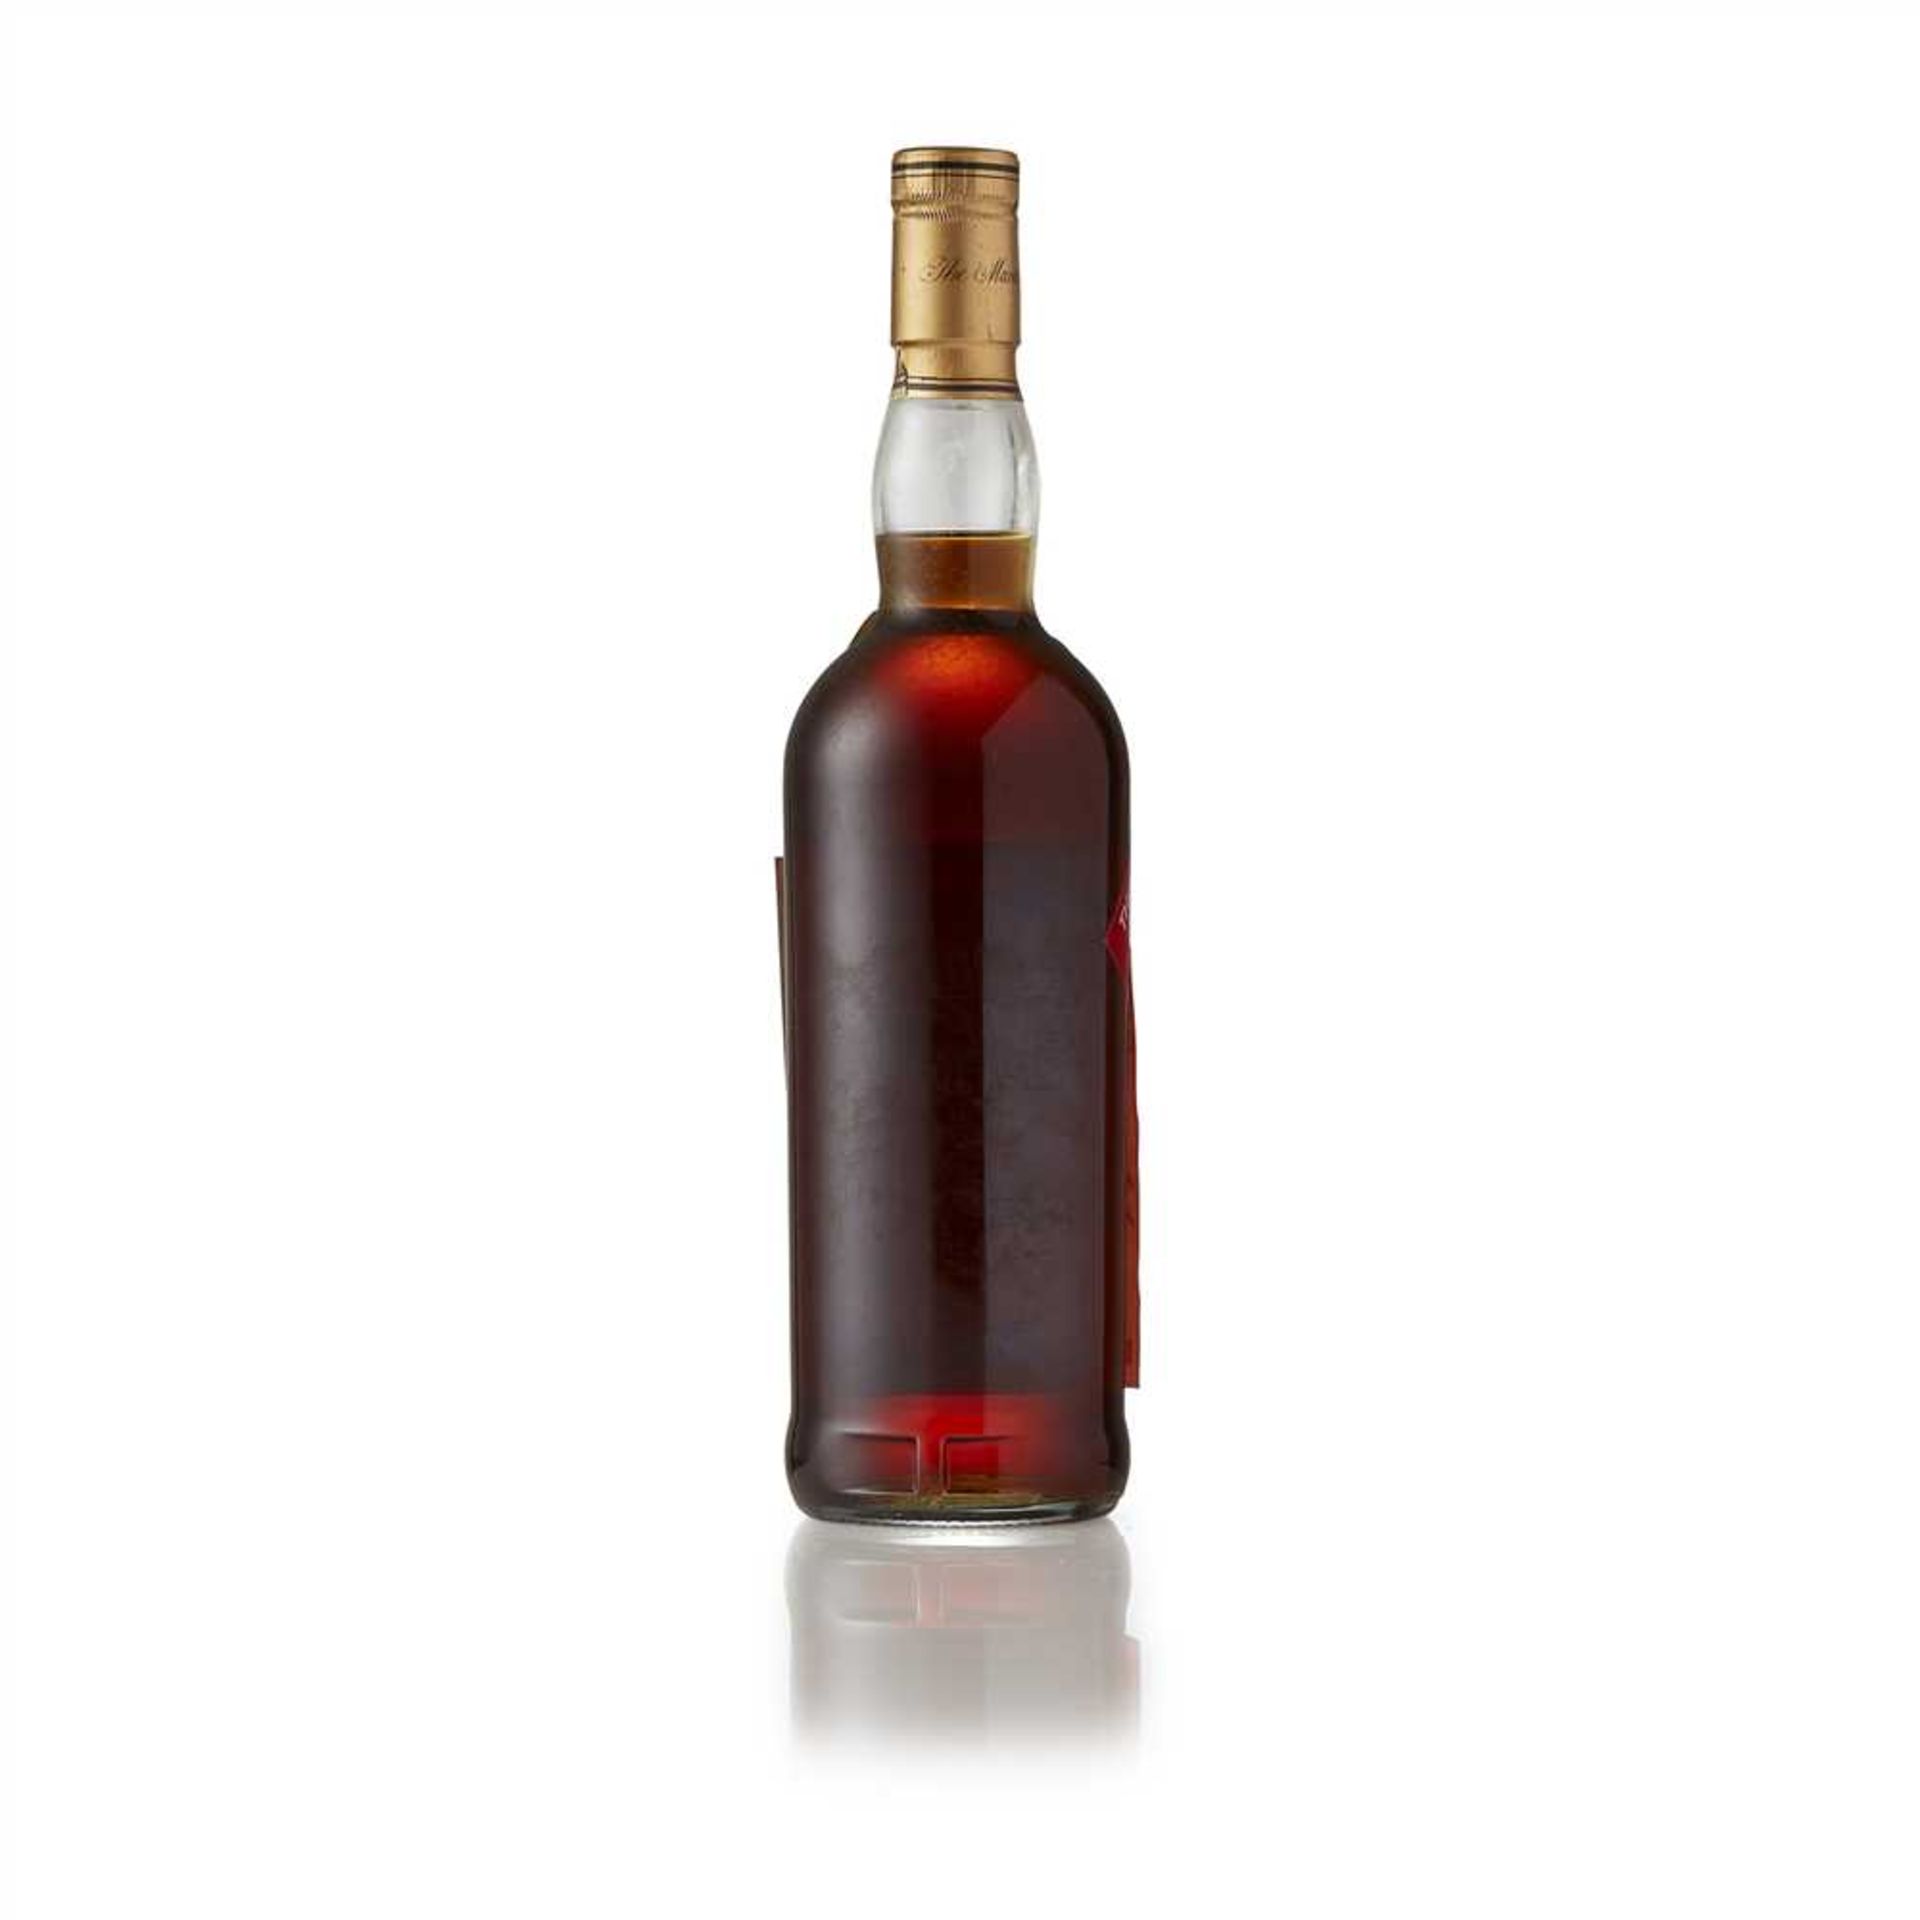 THE MACALLAN 10 YEAR OLD 100 PROOF (1980S) - Image 2 of 3